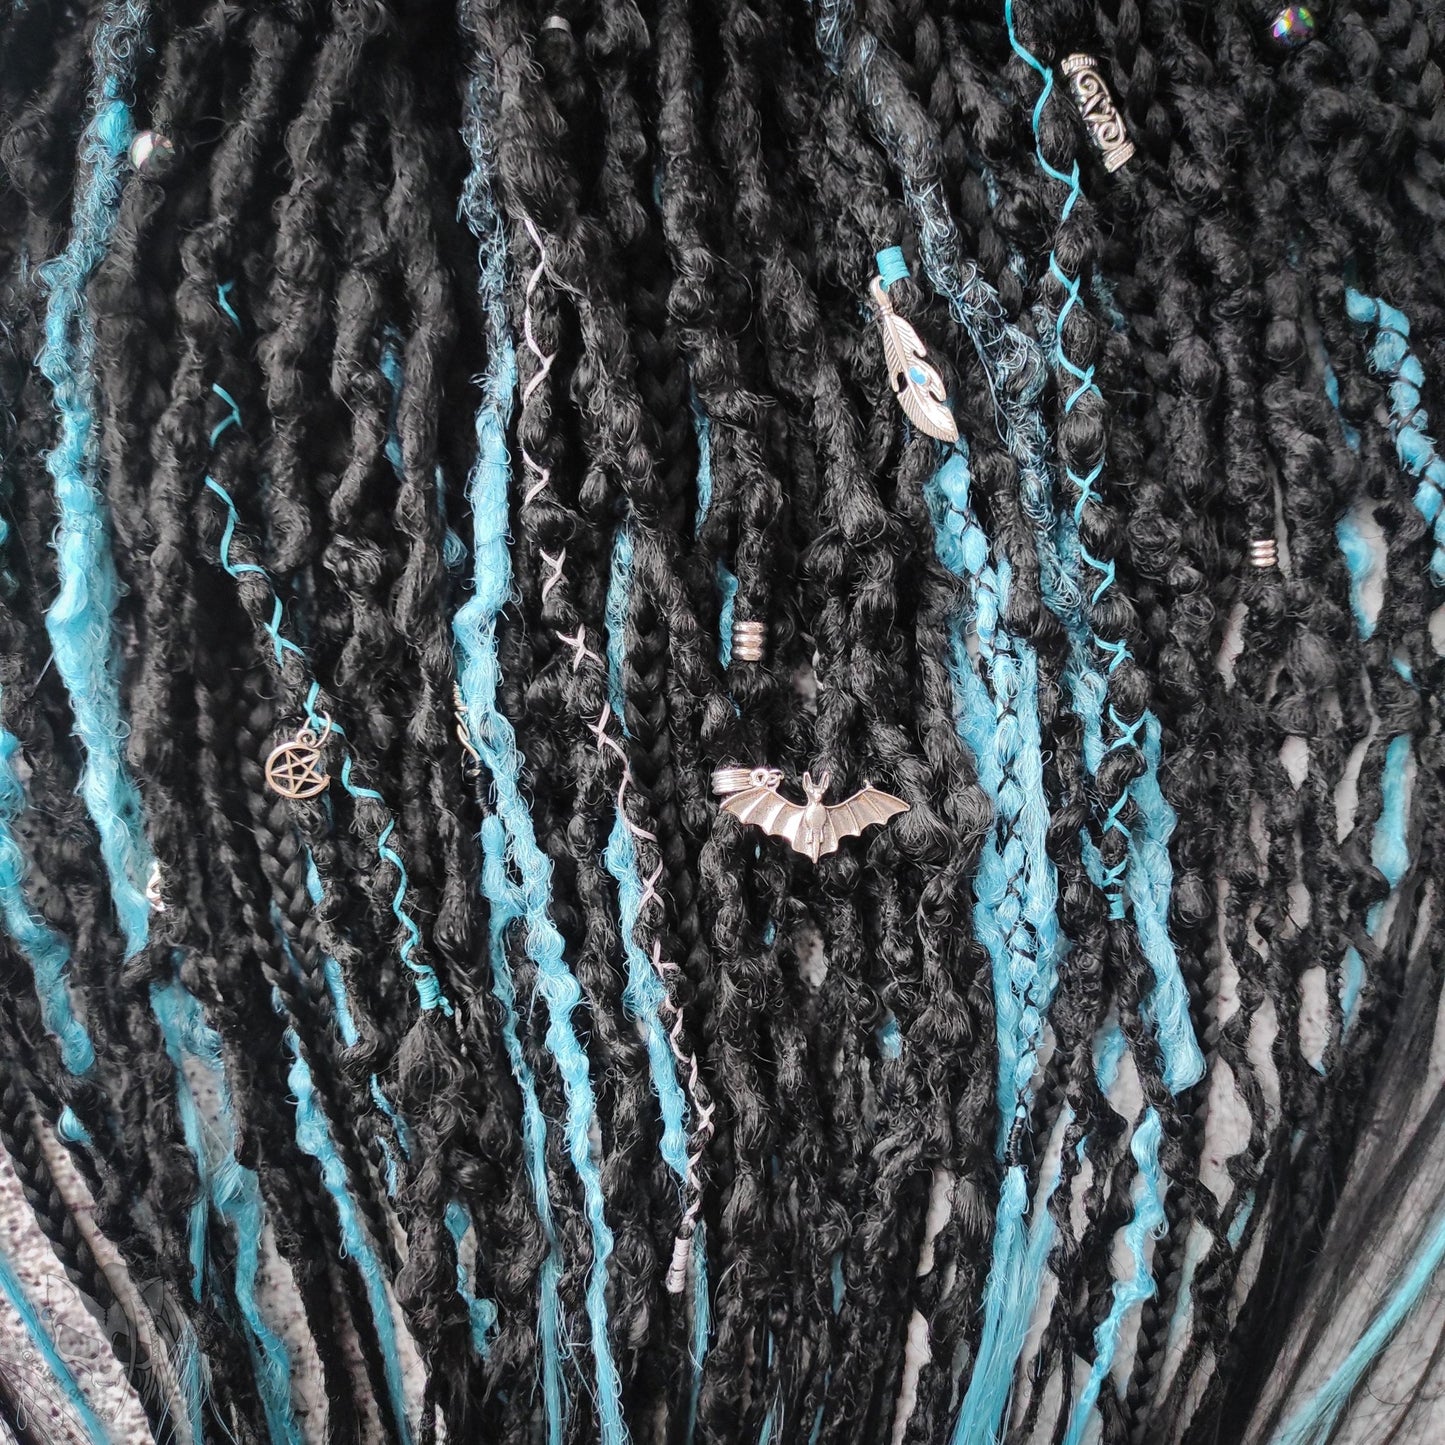 Black with Blue Goth Dreadlocks with Braids. Custom Synthetic Extensions.